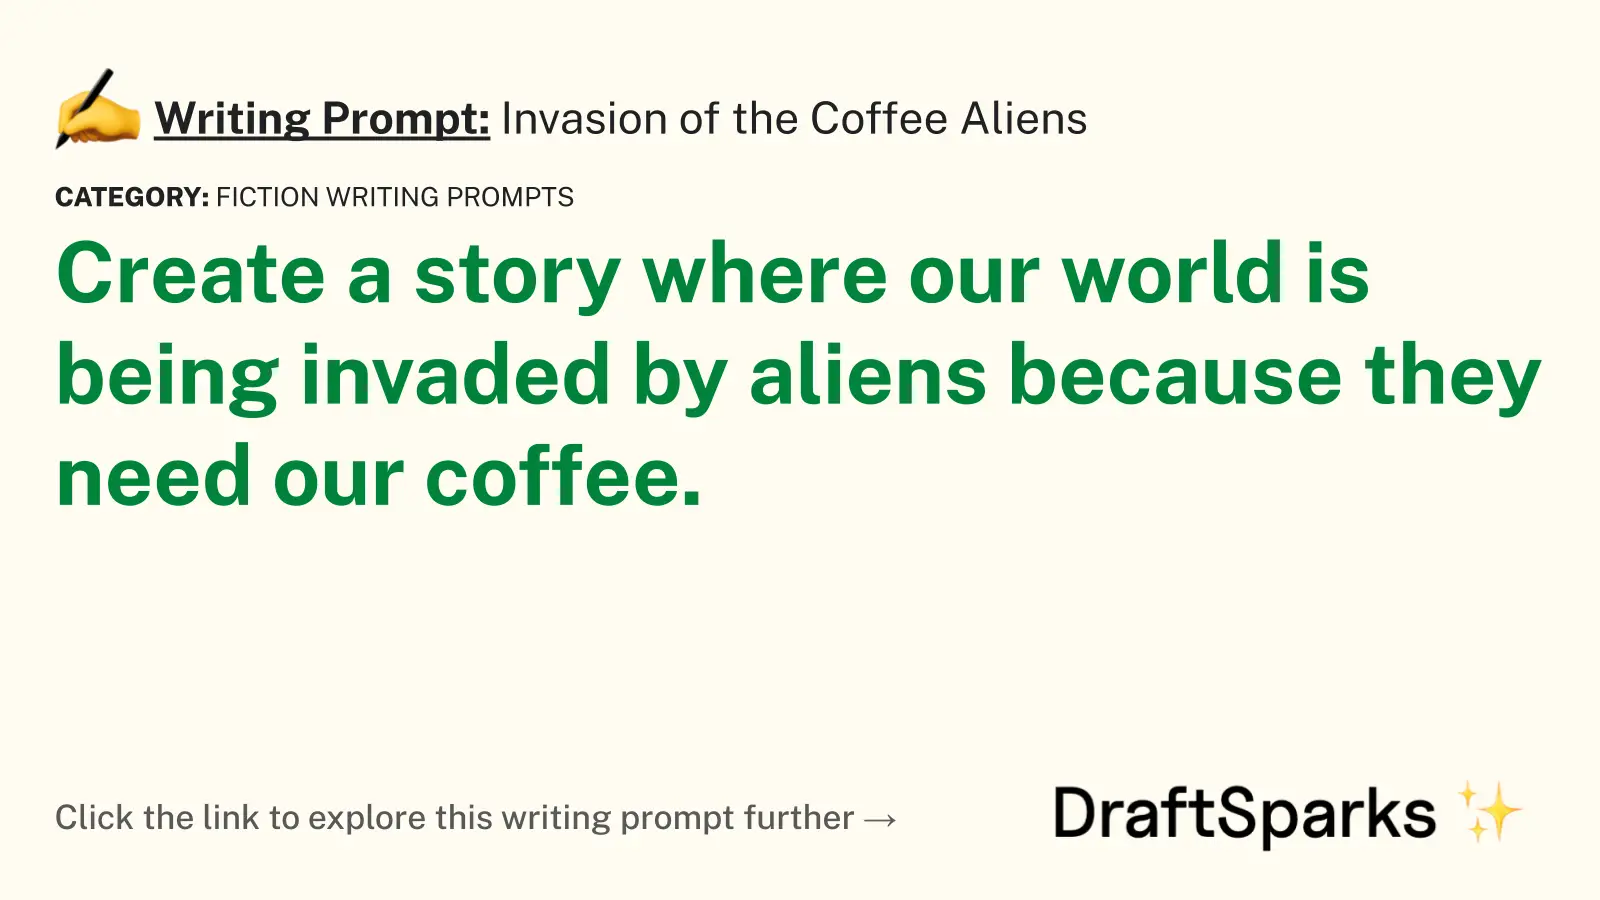 Invasion of the Coffee Aliens